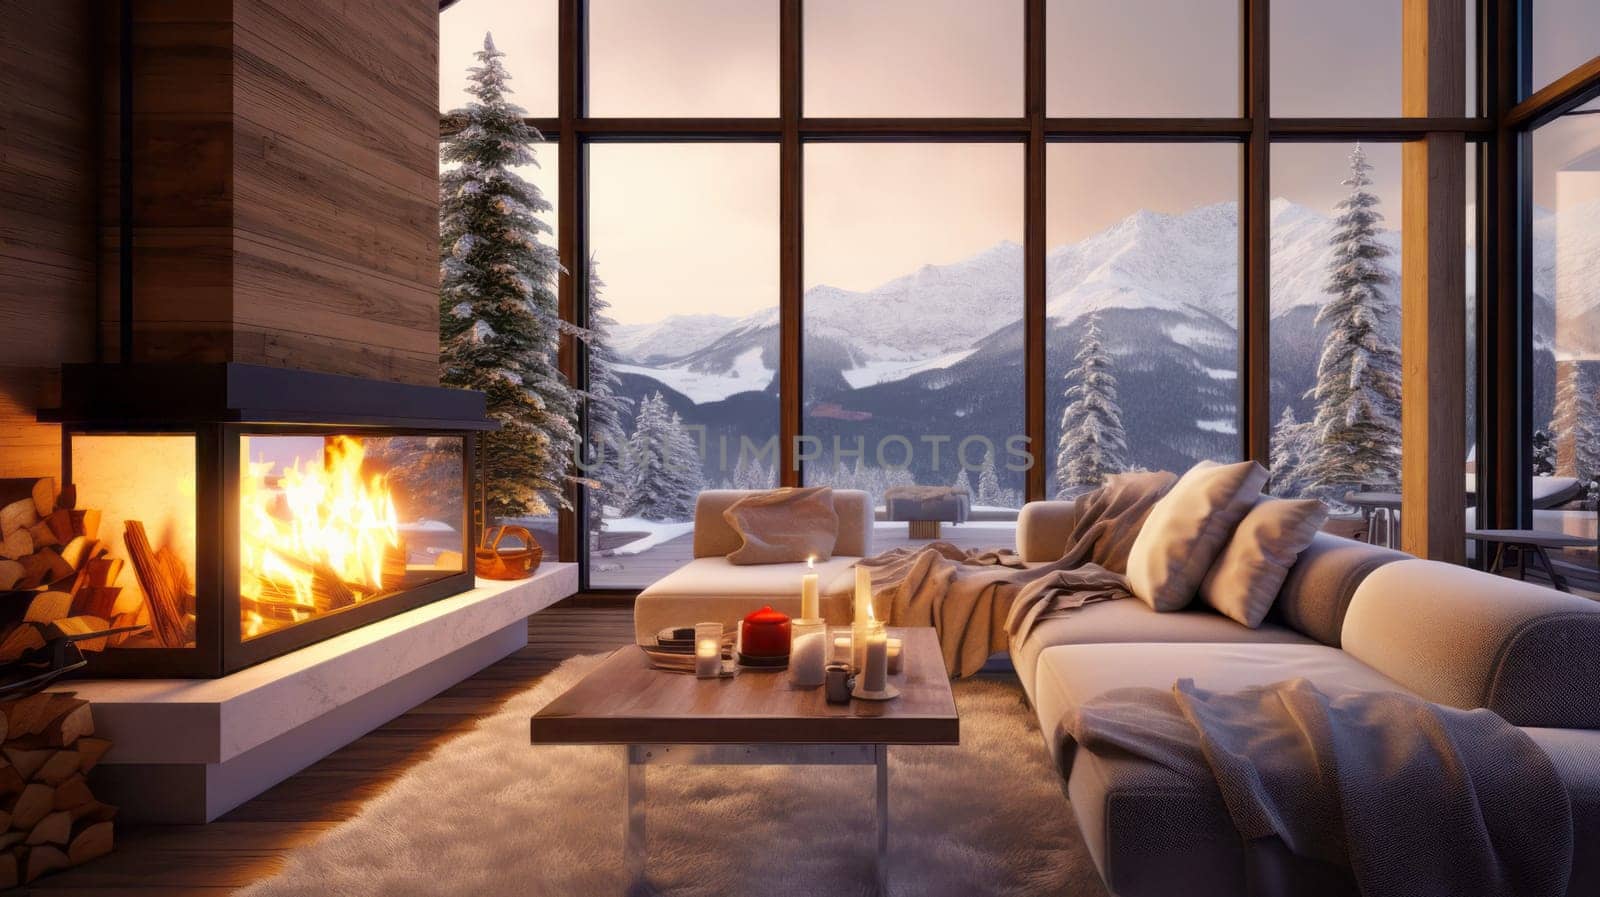 Cozy modern interior of a winter living room at a ski resort at sunset.